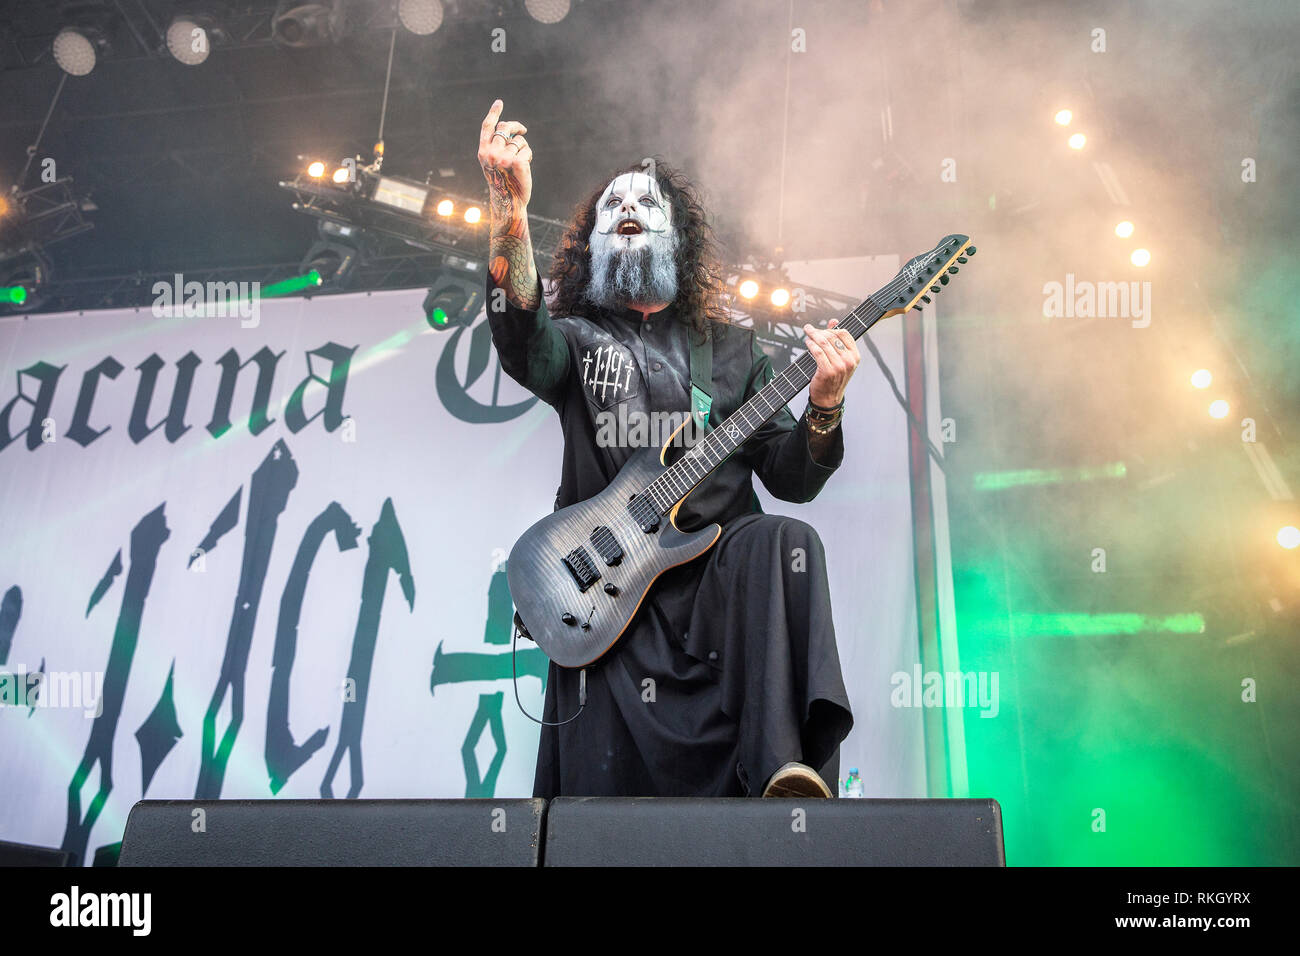 Sweden, Solvesborg - June 8, 2018. The Italian gothic matal band Lacuna Coil performs a live concert during the Swedish music festival Sweden Rock Festival 2018. Here guitarist Diego Cavalotti is seen live on stage. (Photo credit: Gonzales Photo - Terje Dokken). Stock Photo